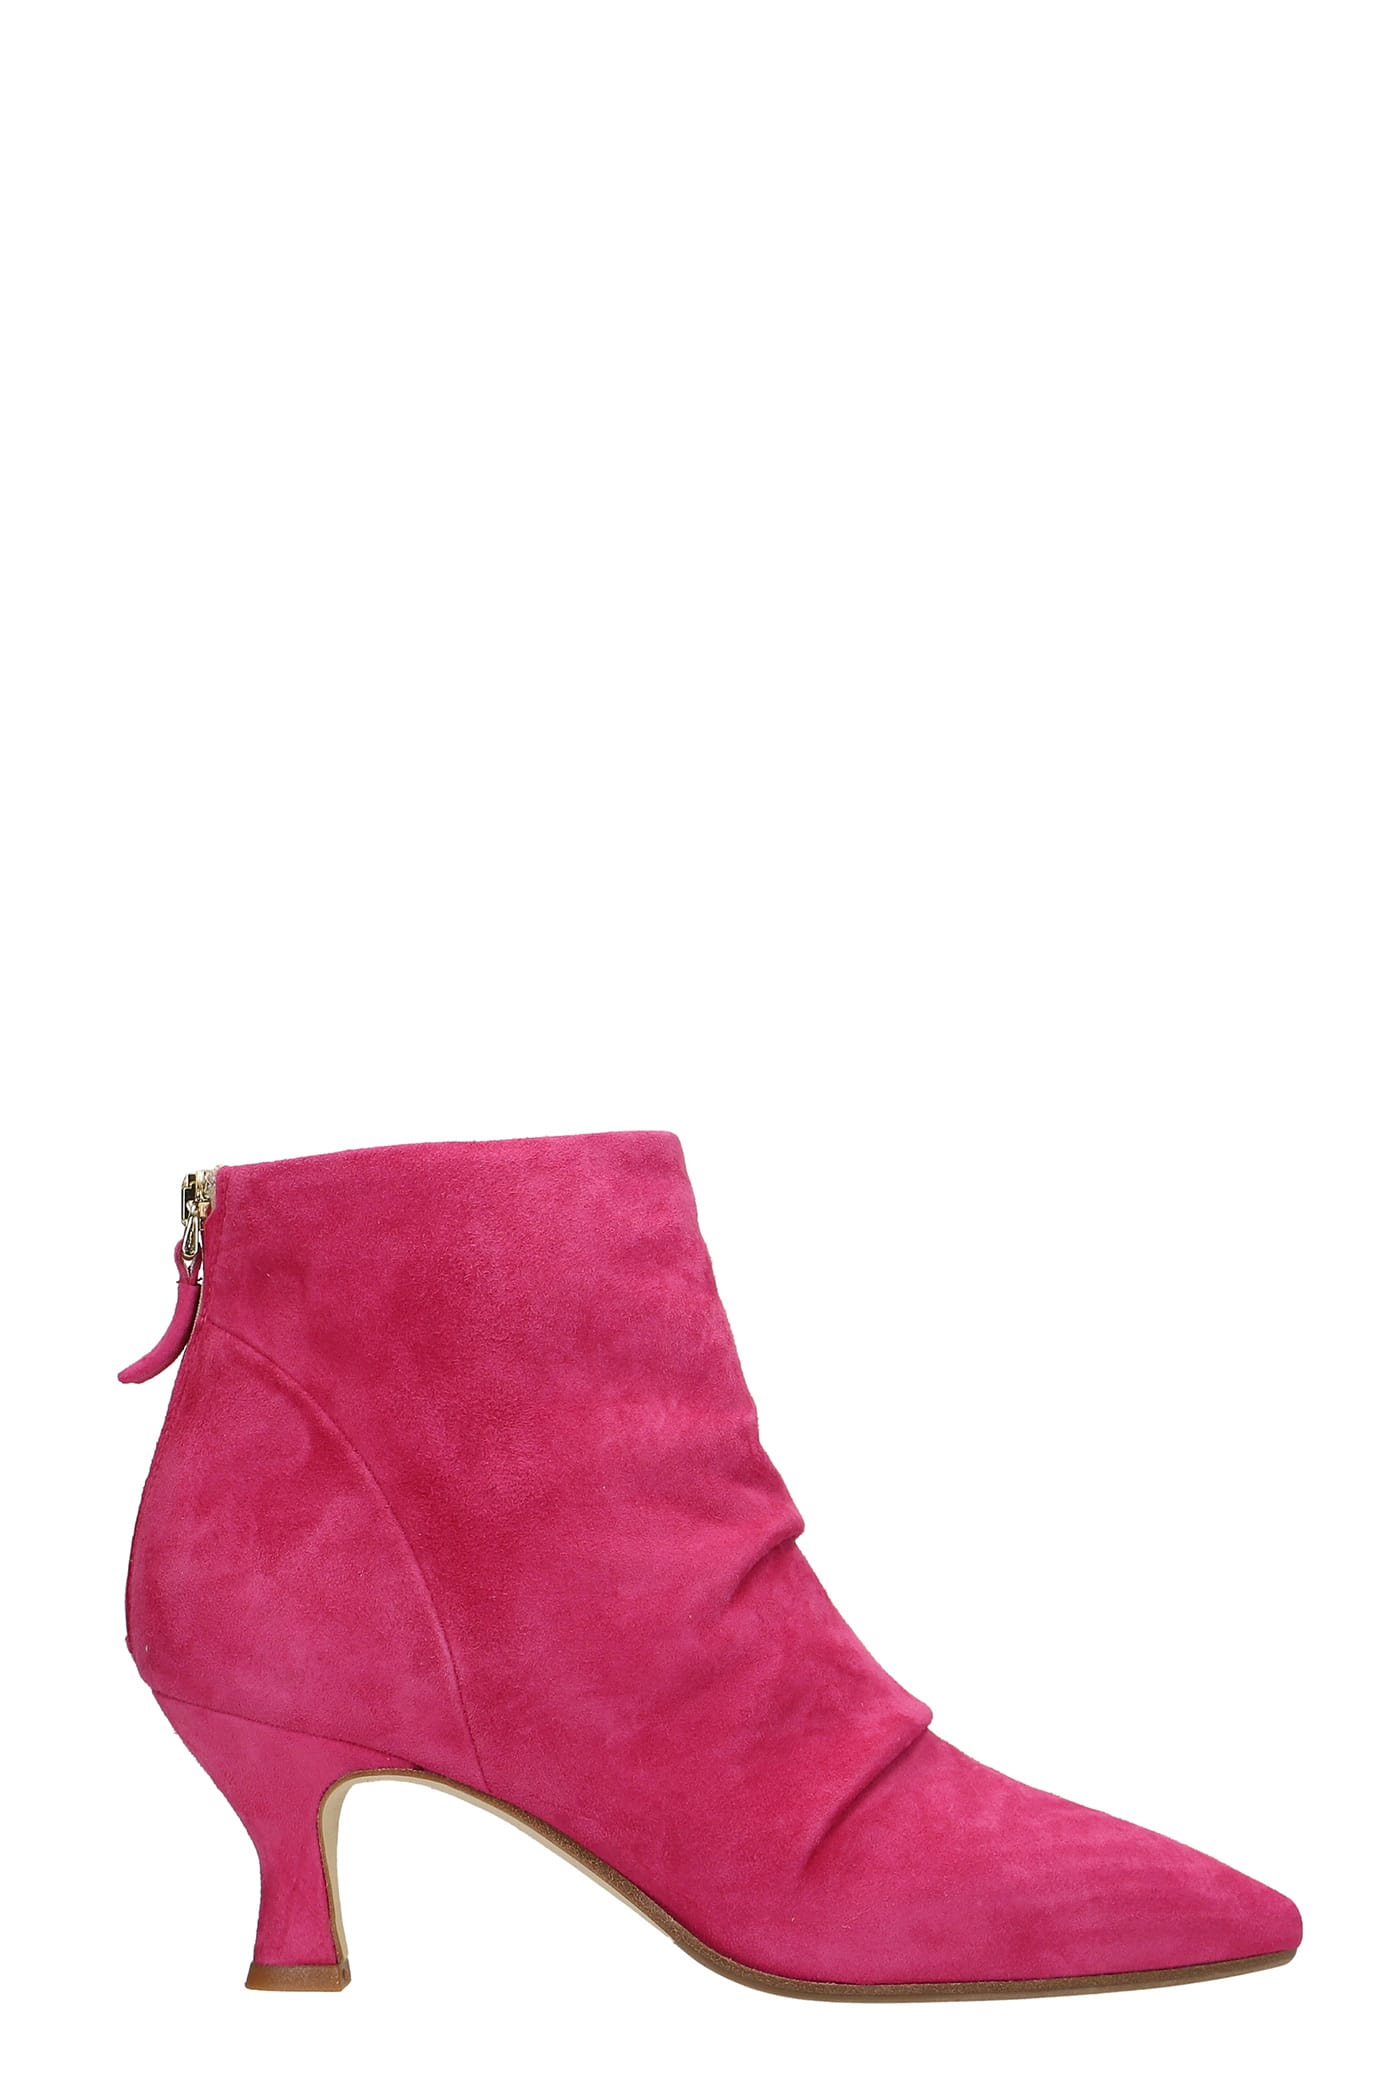 Julie Dee High Heels Ankle Boots In Fuxia Suede